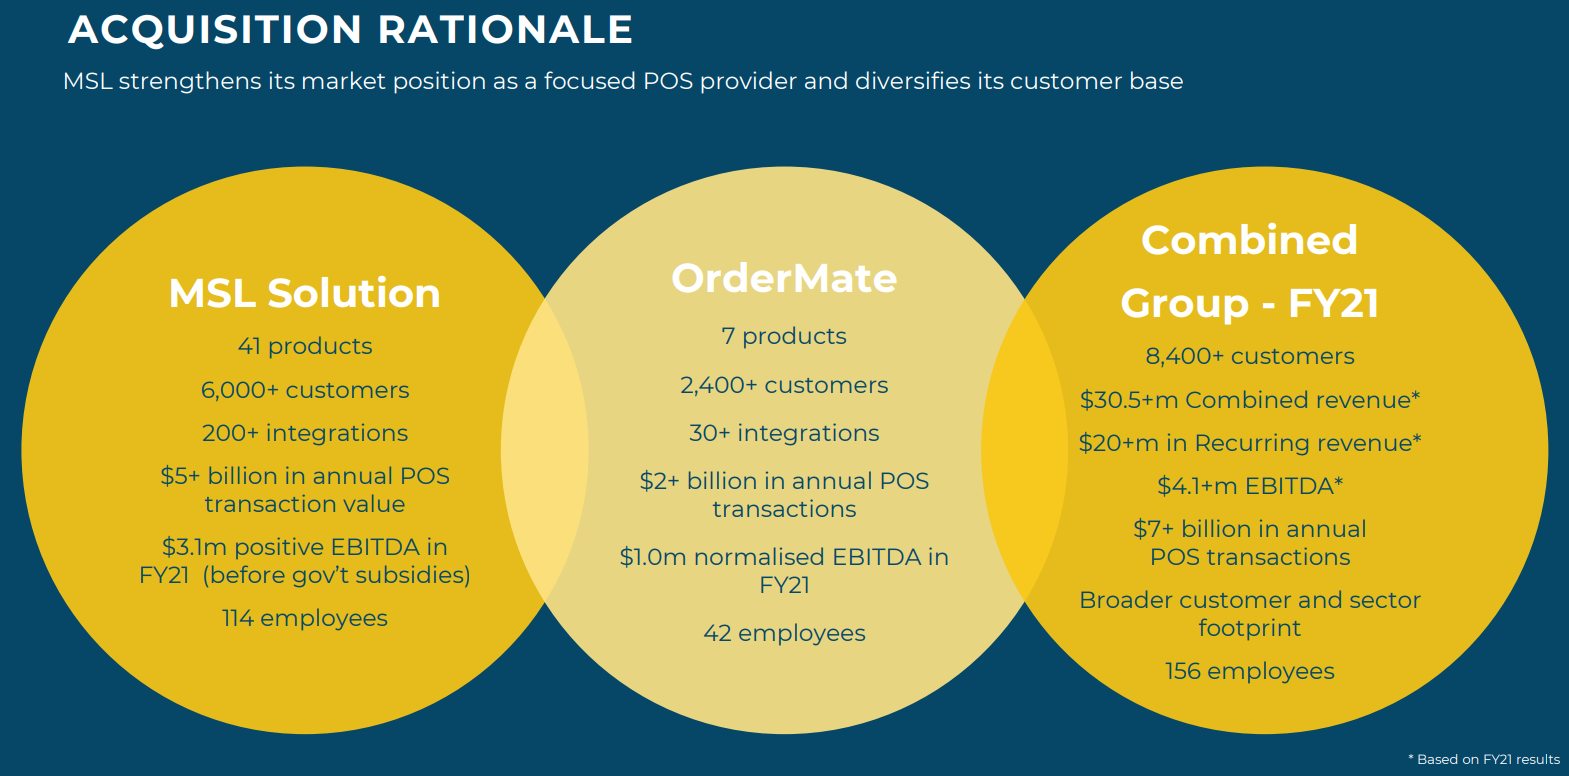 MSL Solutions' OrderMate Acquisition Rationale